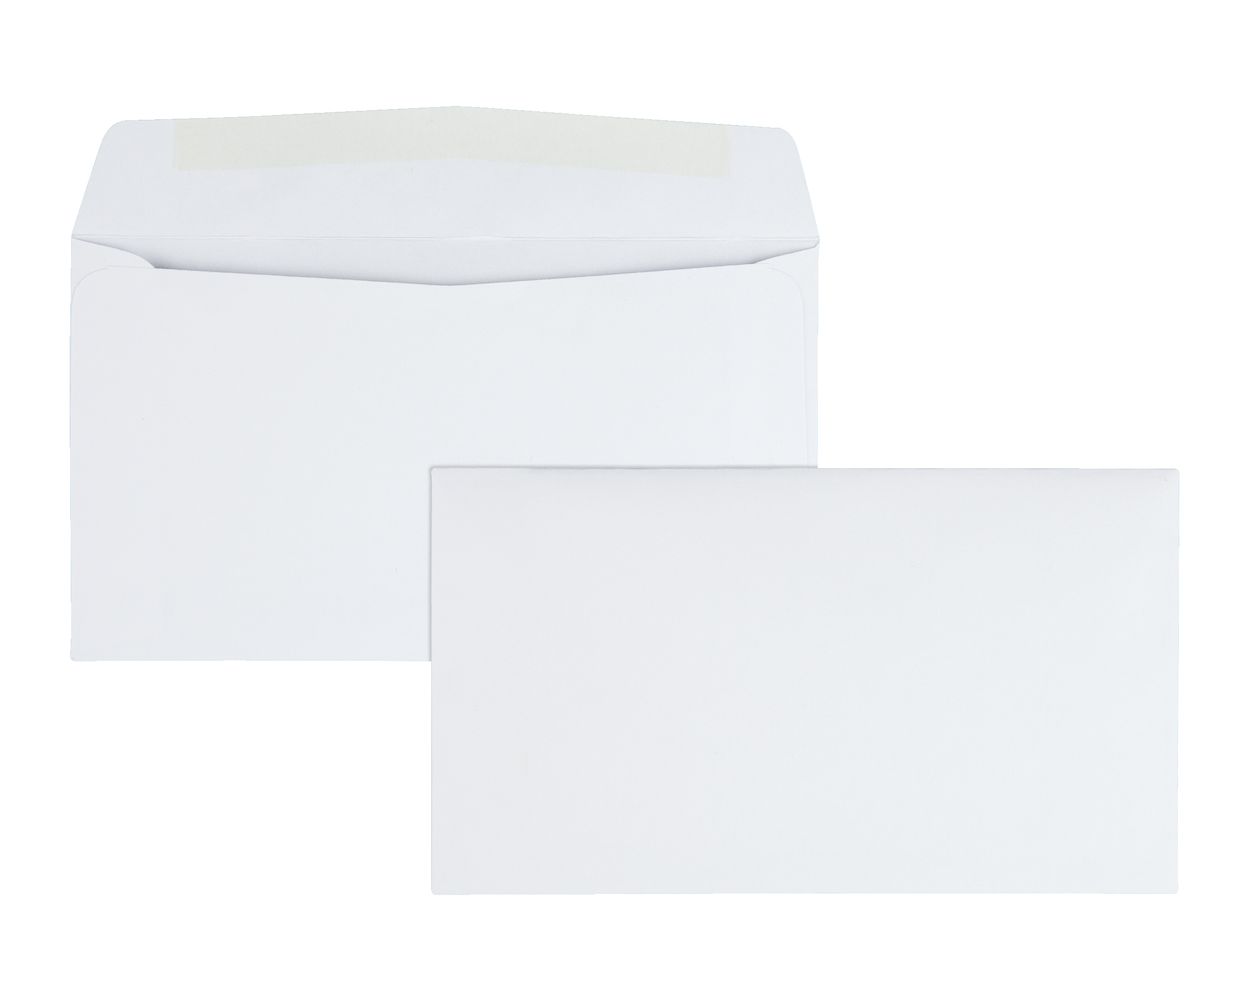 5-3/8 x 6-1/2 500 per Box 24 lb White Wove #6-3/4 Business Envelopes with a Gummed Flap for Standard Remittance Business Mailing 